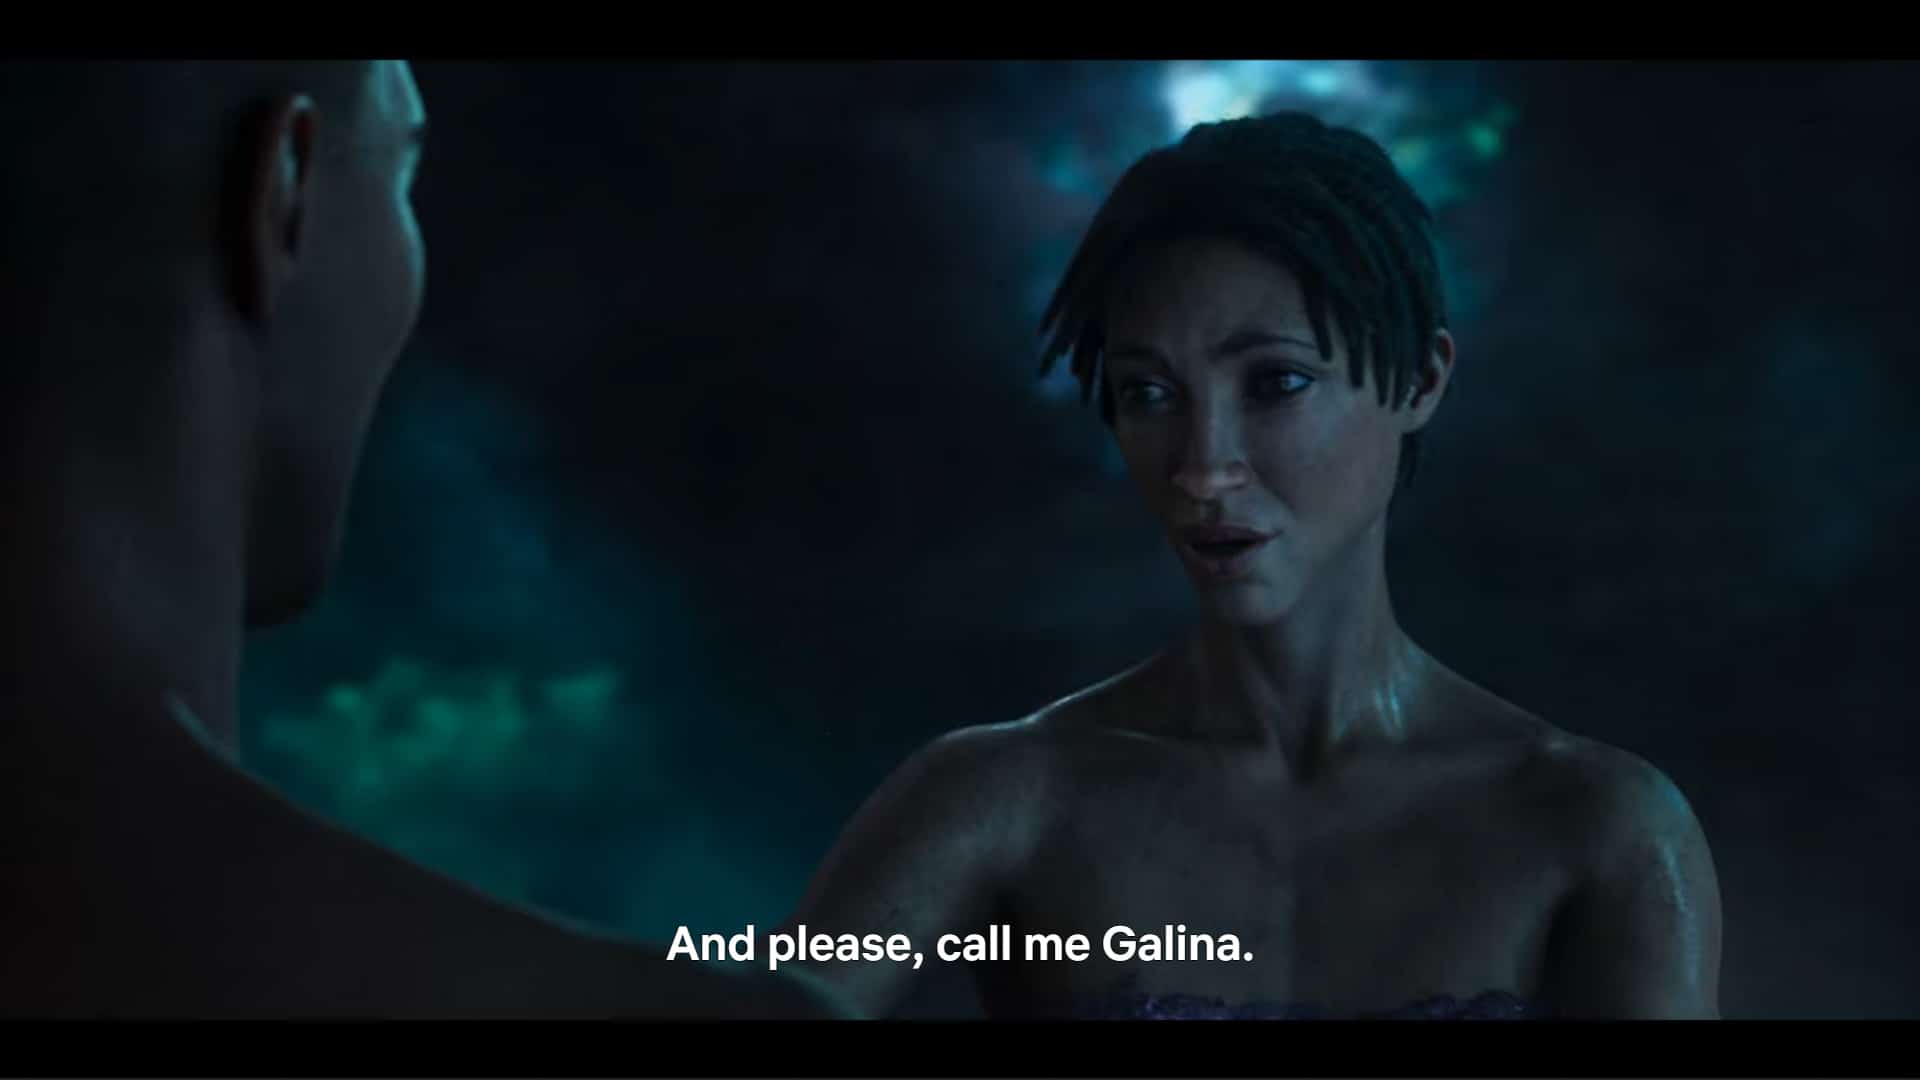 Dr. Galina Mirny (Rosario Dawson) asking Dr. Afriel to call her by her first name